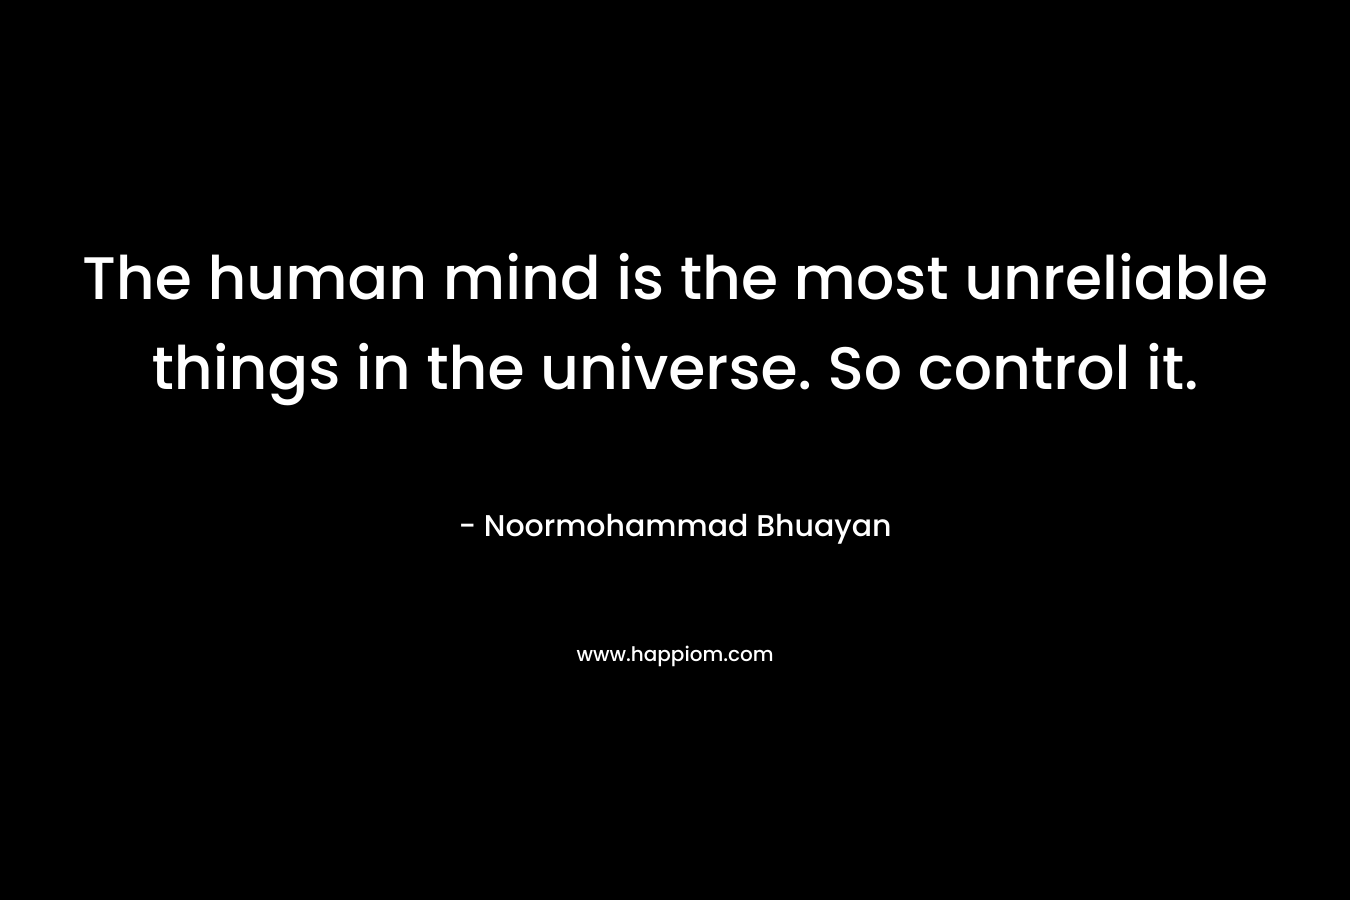 The human mind is the most unreliable things in the universe. So control it. – Noormohammad Bhuayan